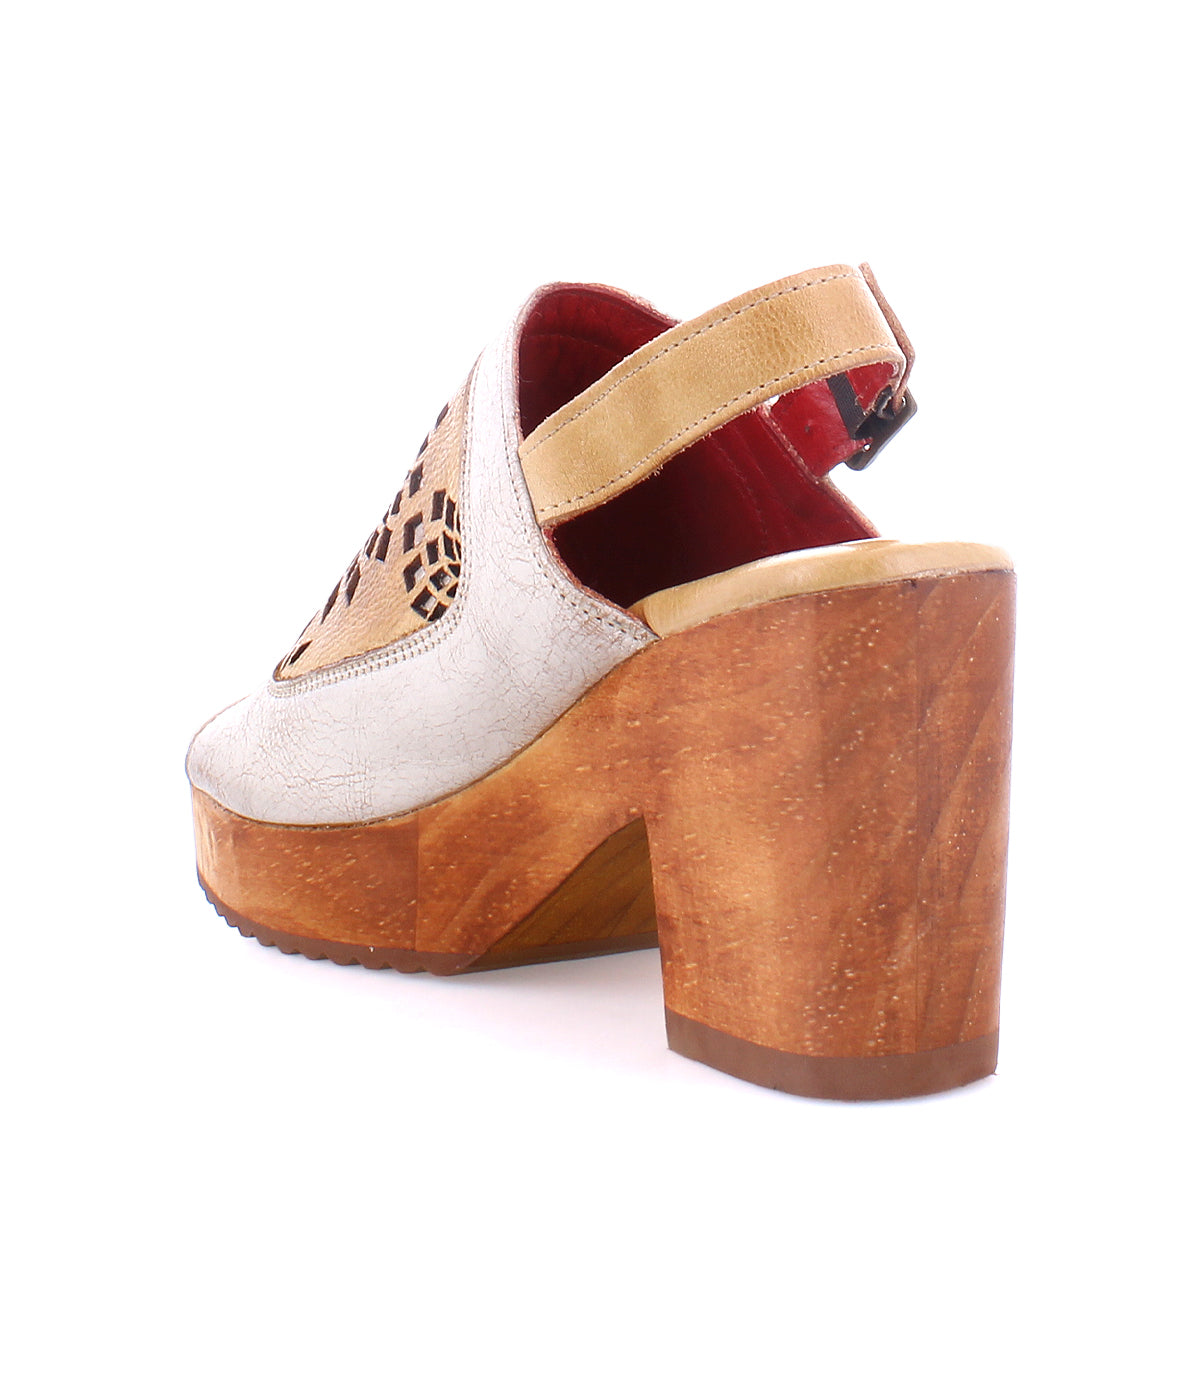 A pair of Bed Stu Jinkie women's open-toe leather shoes with a wooden heel.